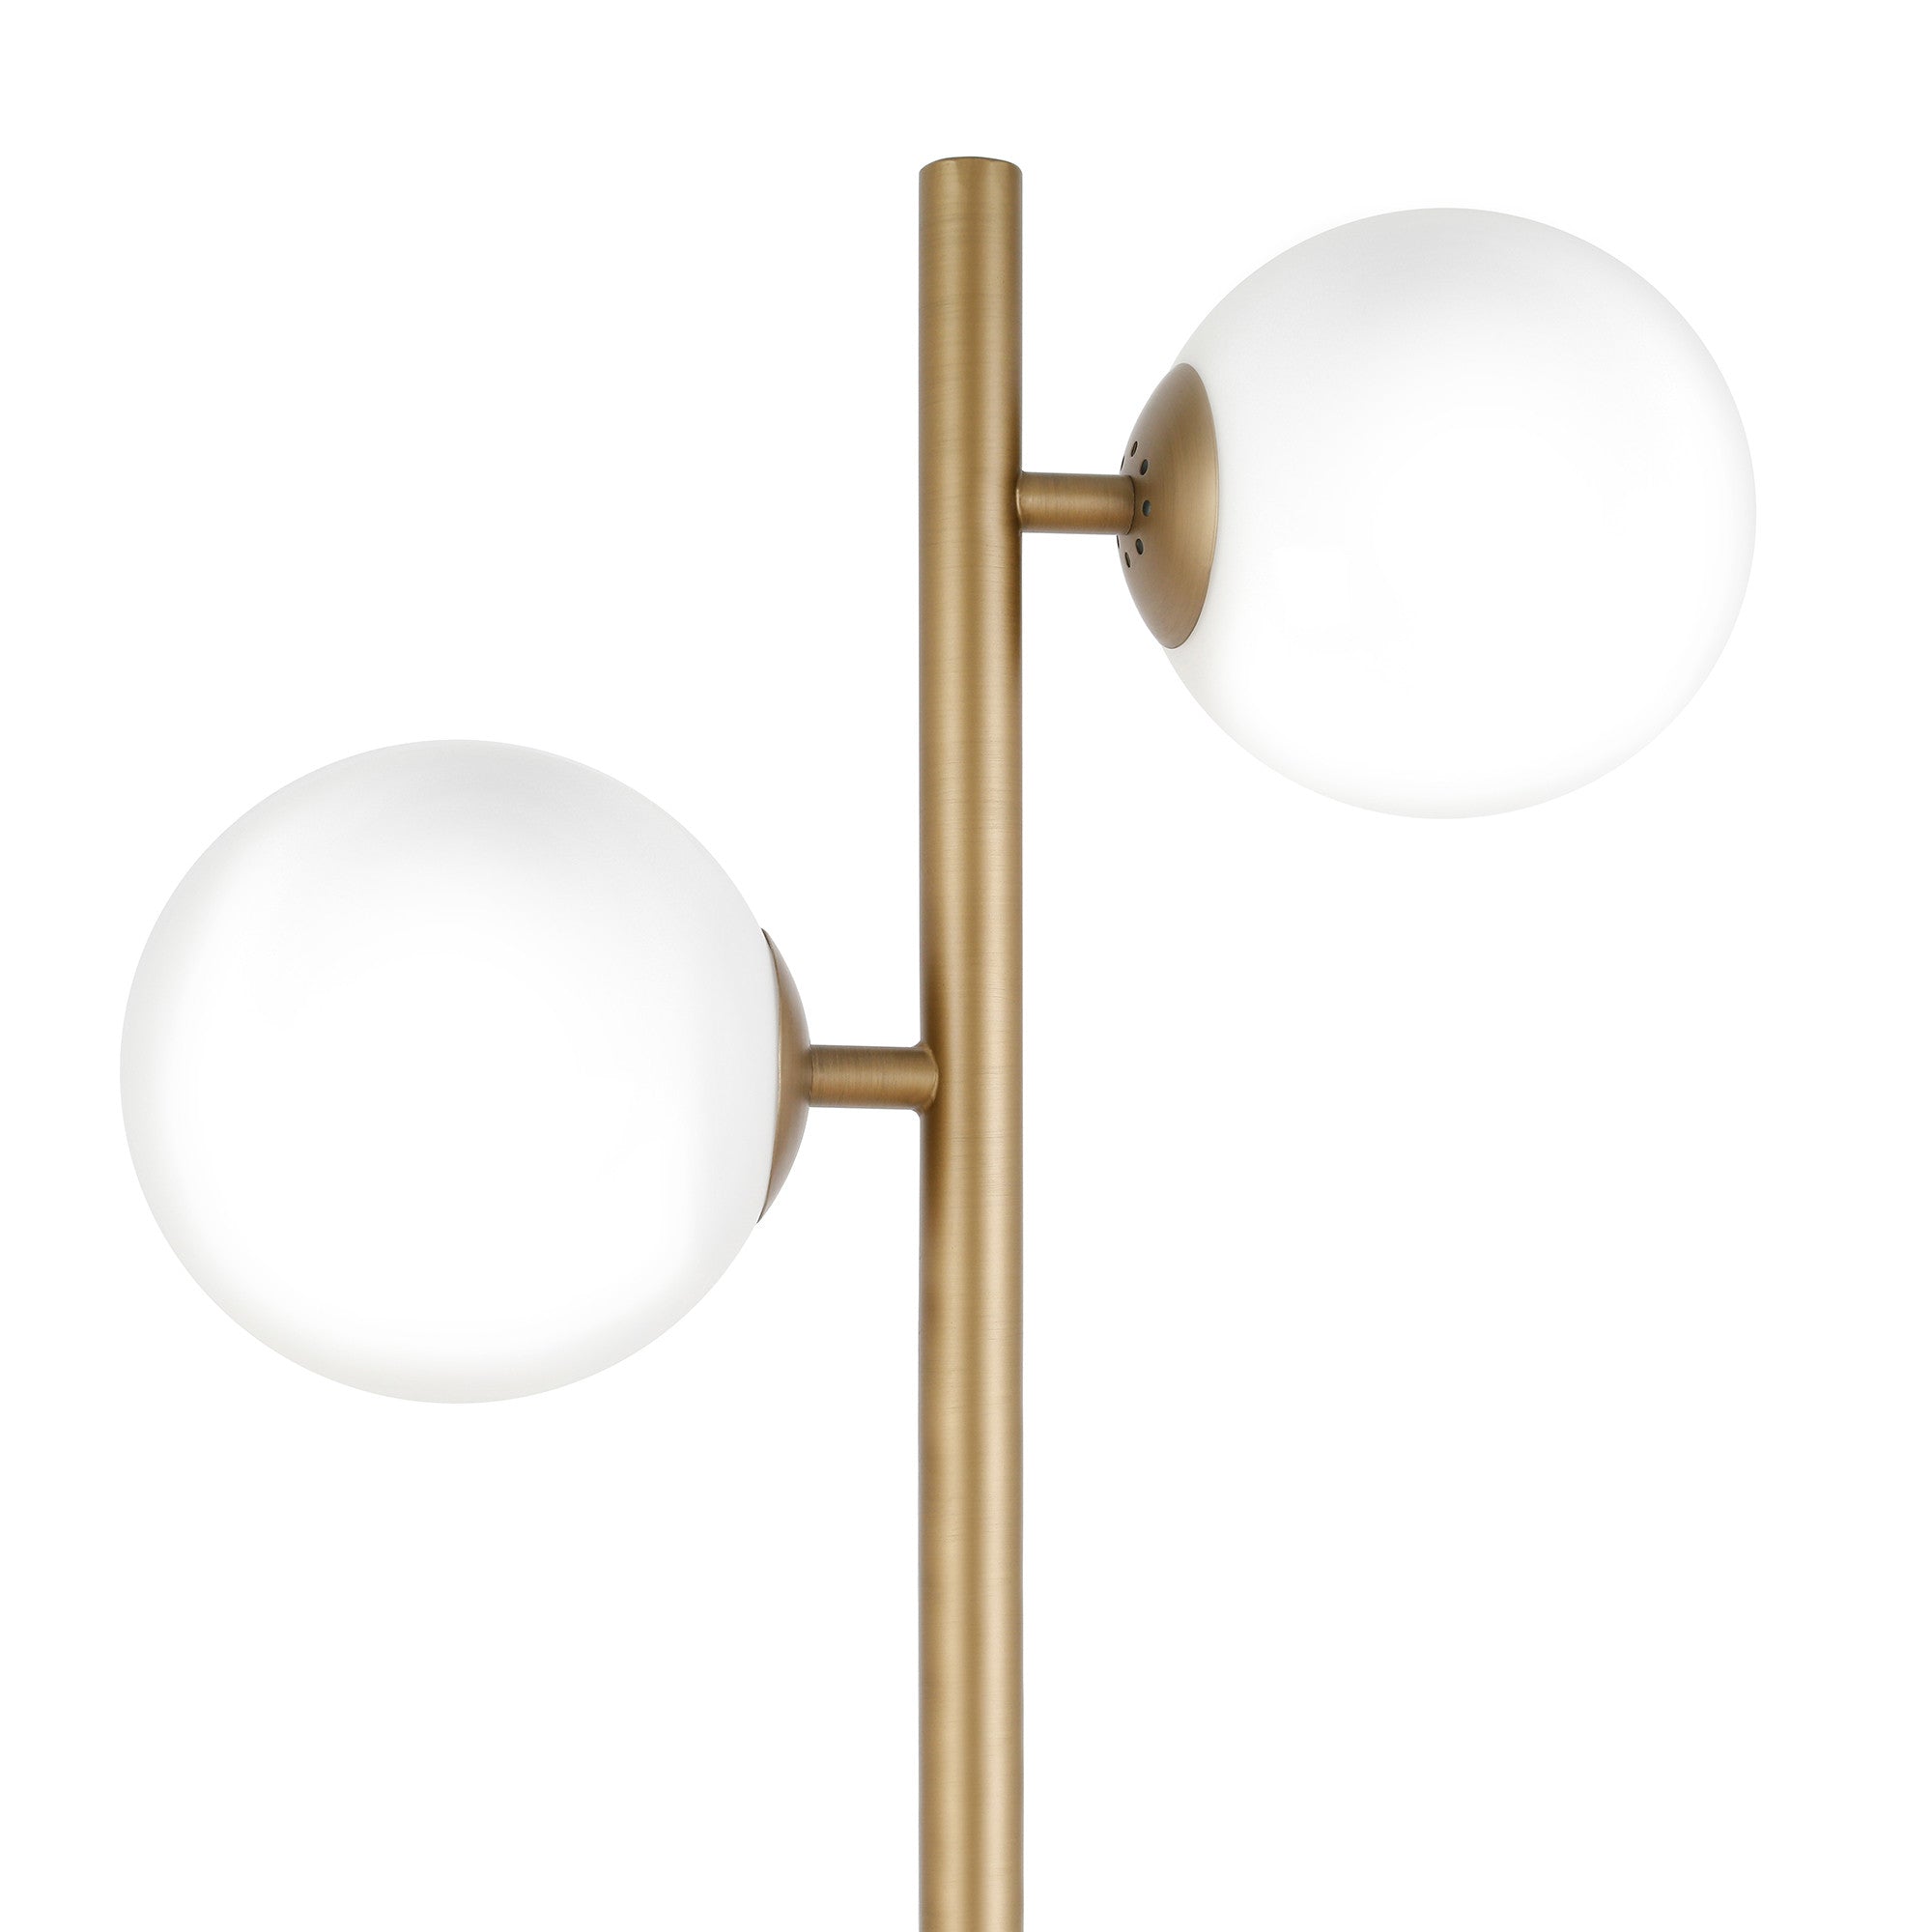 70" Brass Two Light Tree Floor Lamp With White Frosted Glass Globe Shade